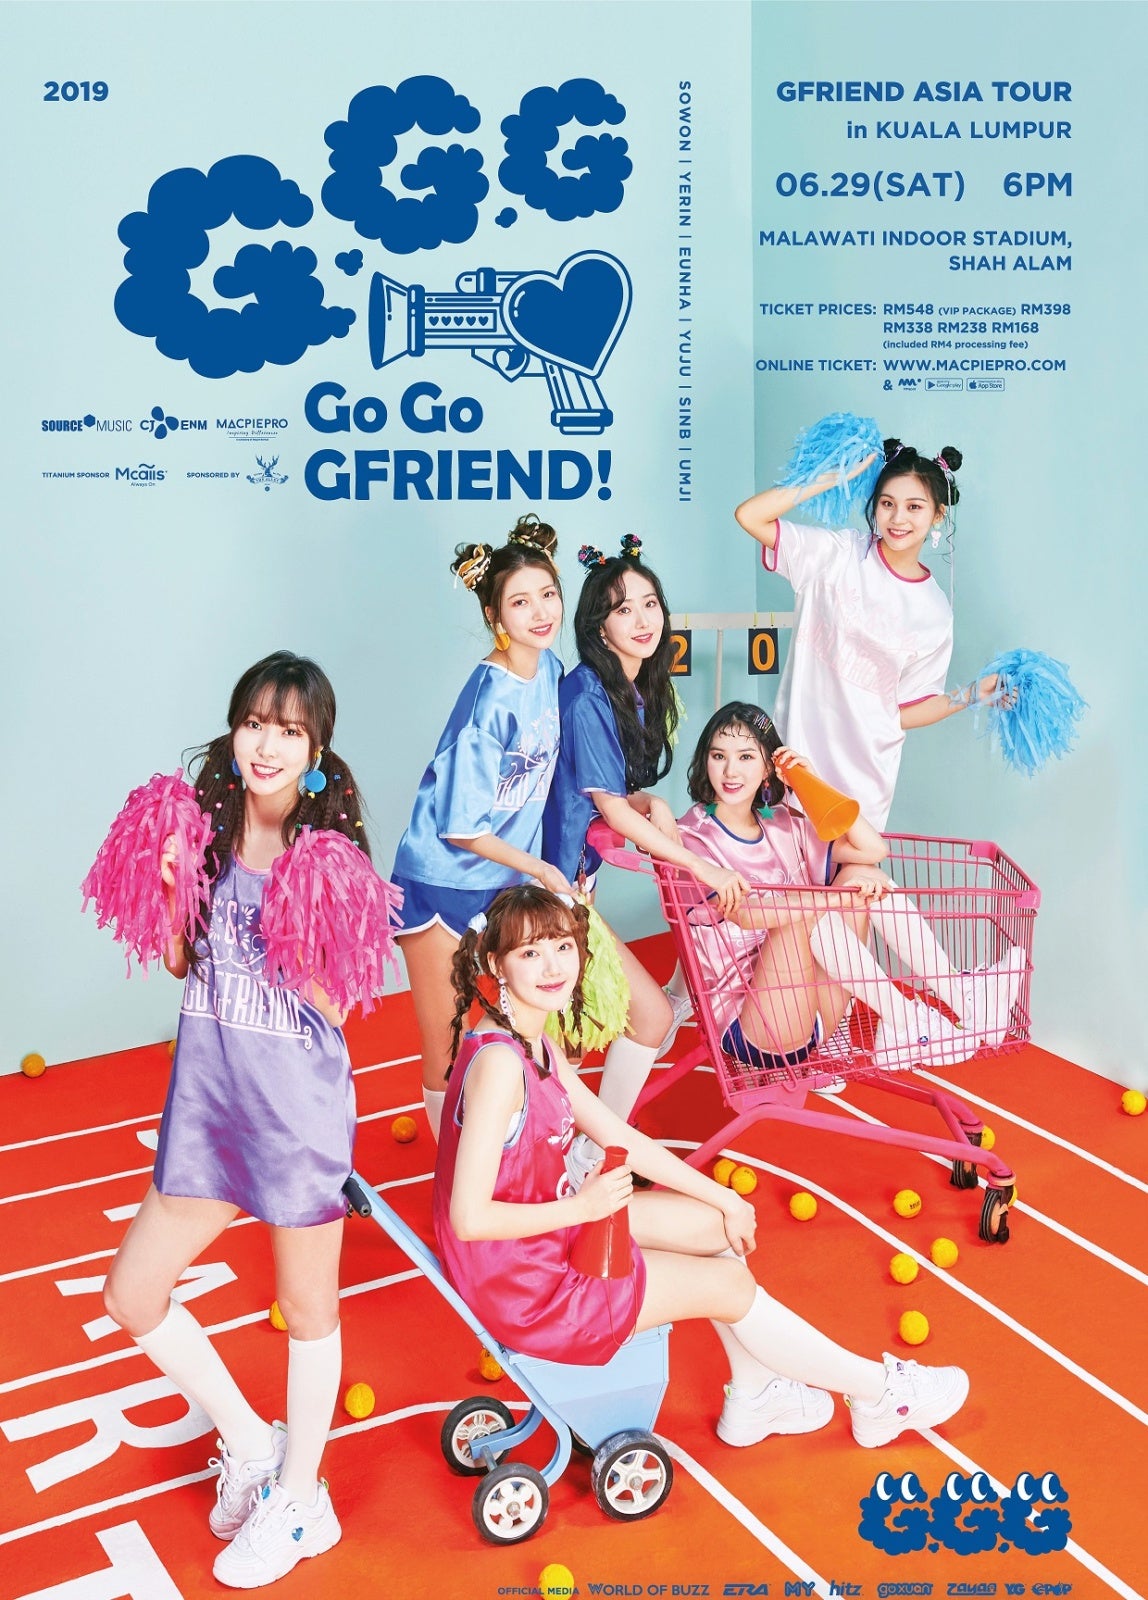 Popular K-Pop Group Gfriend Is Coming To Kl &Amp; Here's How To Get Up To 30% Off Tickets! - World Of Buzz